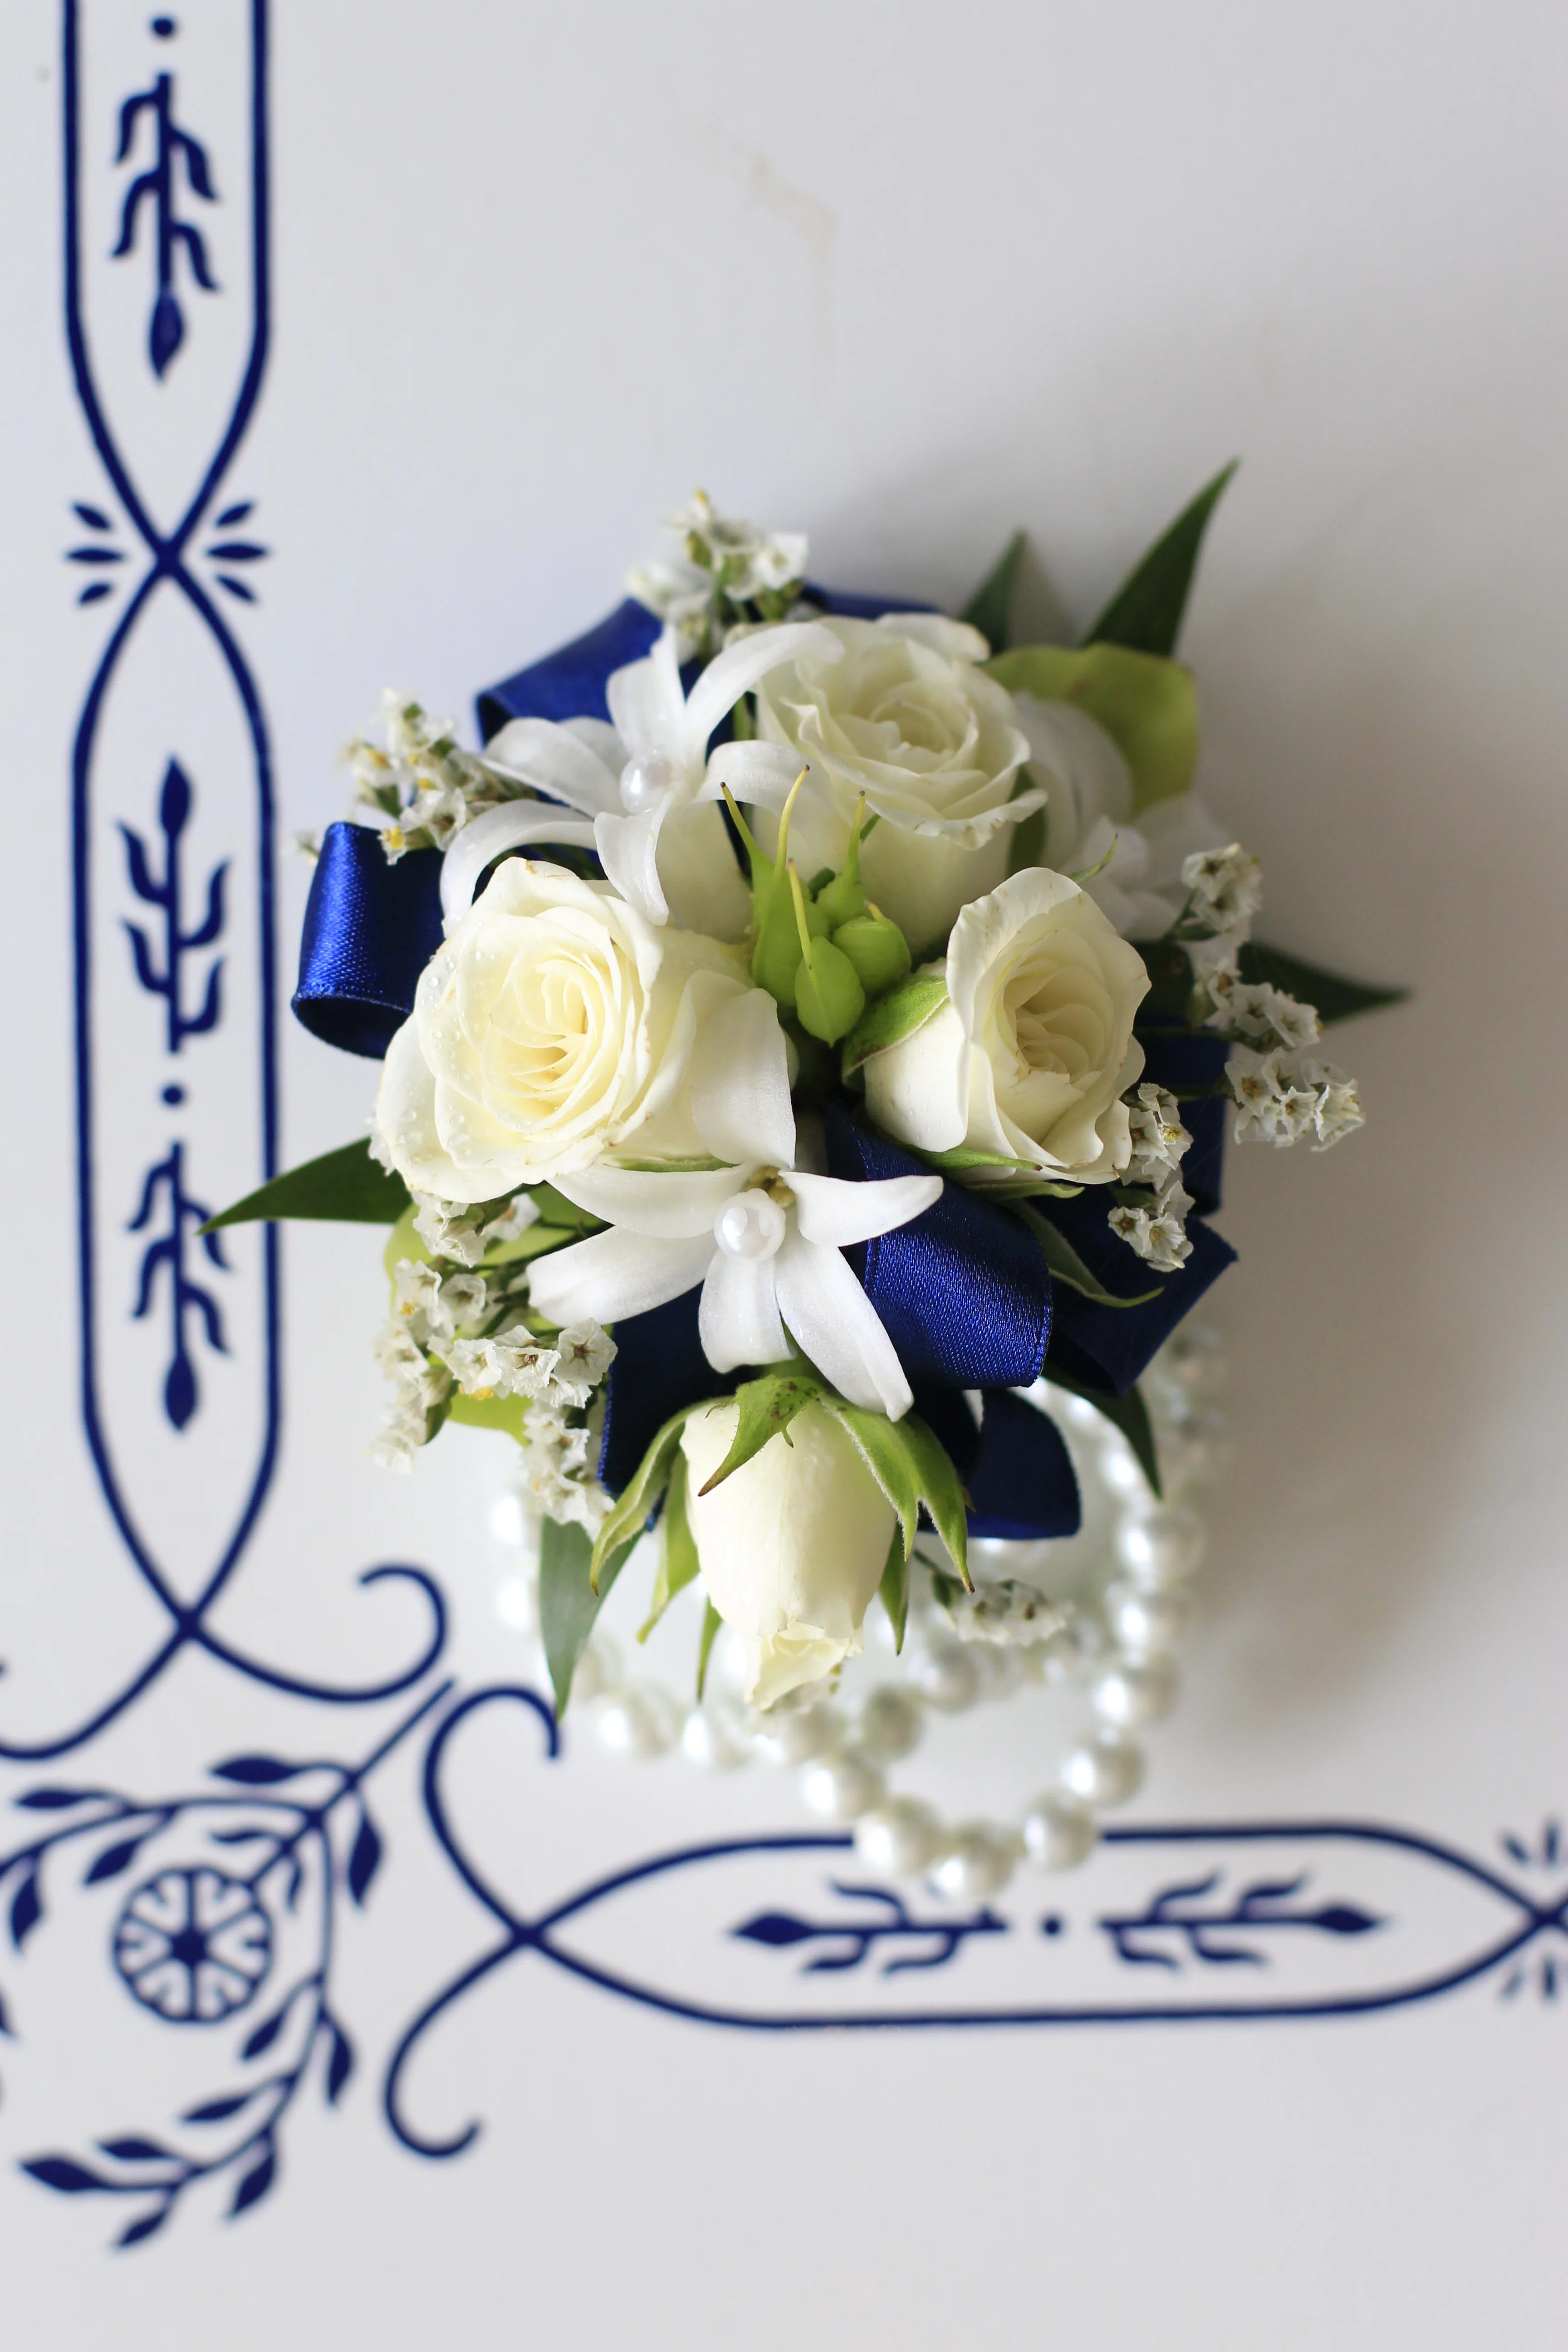 Fancy wrist corsage - White roses with accent flower on pearl band.  Accent flower may vary but will always coordinate.  PLEASE SPECIFY RIBBON COLOR IN SPECIAL INSTRUCTIONS.  COLORS AVAILABLE ARE ROYAL BLUE, WHITE, SILVER, GOLD, BLACK, LIGHT PINK.  CALL TO INQUIRE ABOUT OTHER COLORS.